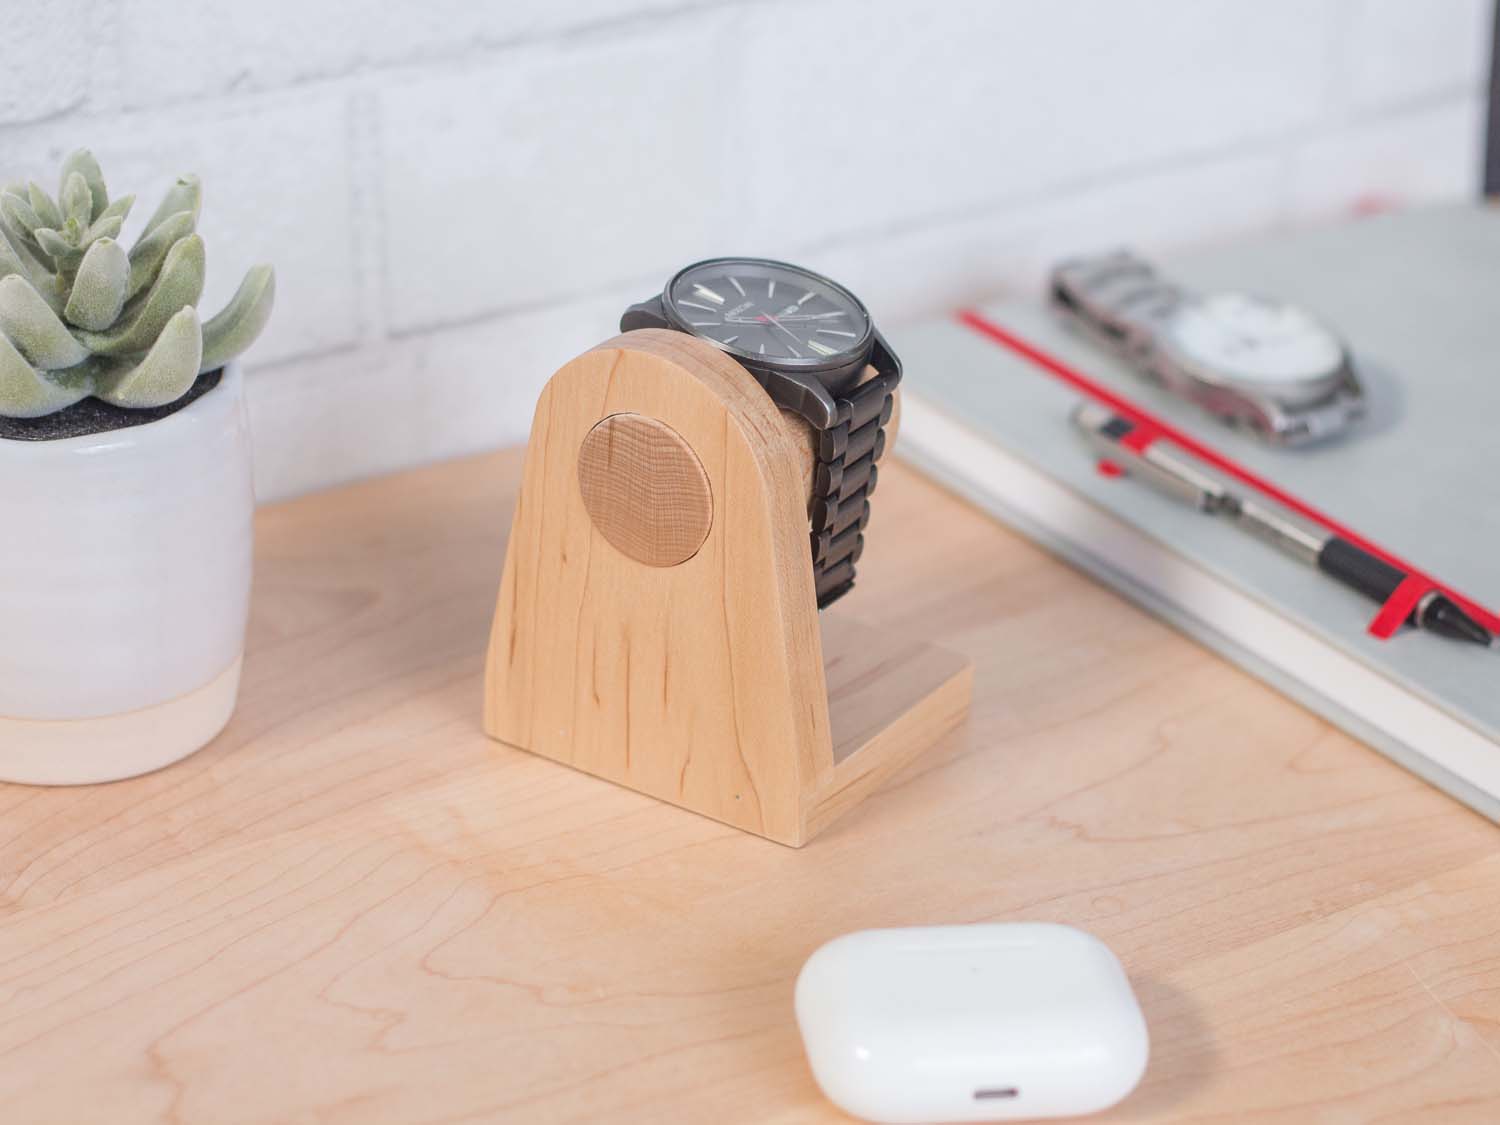 One watch rests on a smooth maple dowel which rests on a strong maple base. Set on a desk with notebook and camera. The warm wood contrasts nicely with the mechanical metal watch.